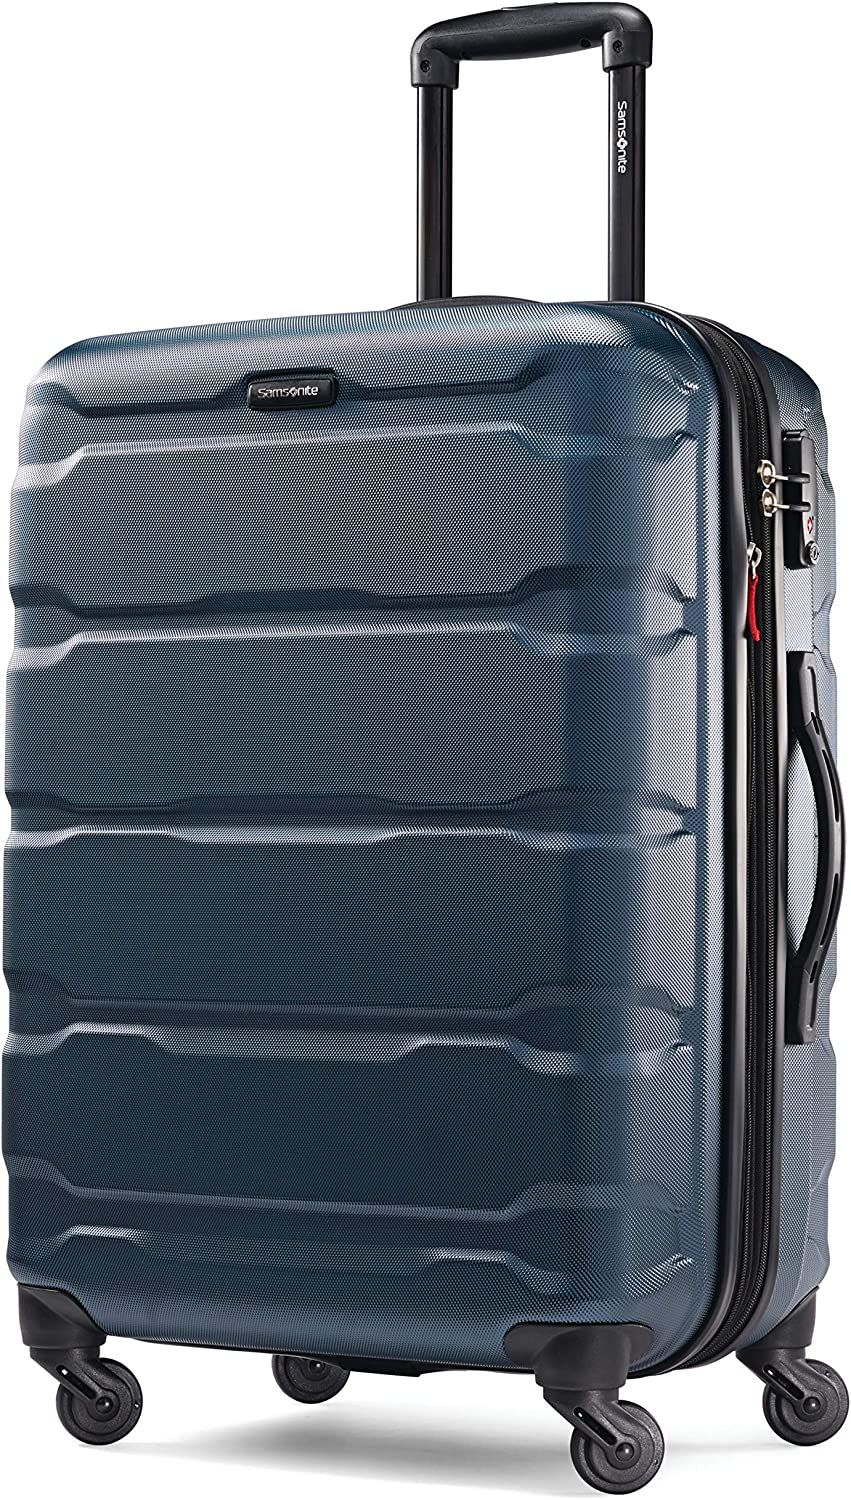 Samsonite Omni PC Hardside Expandable Luggage with Spinner Wheels, Teal, Checked-Medium 24-Inch | Amazon (US)